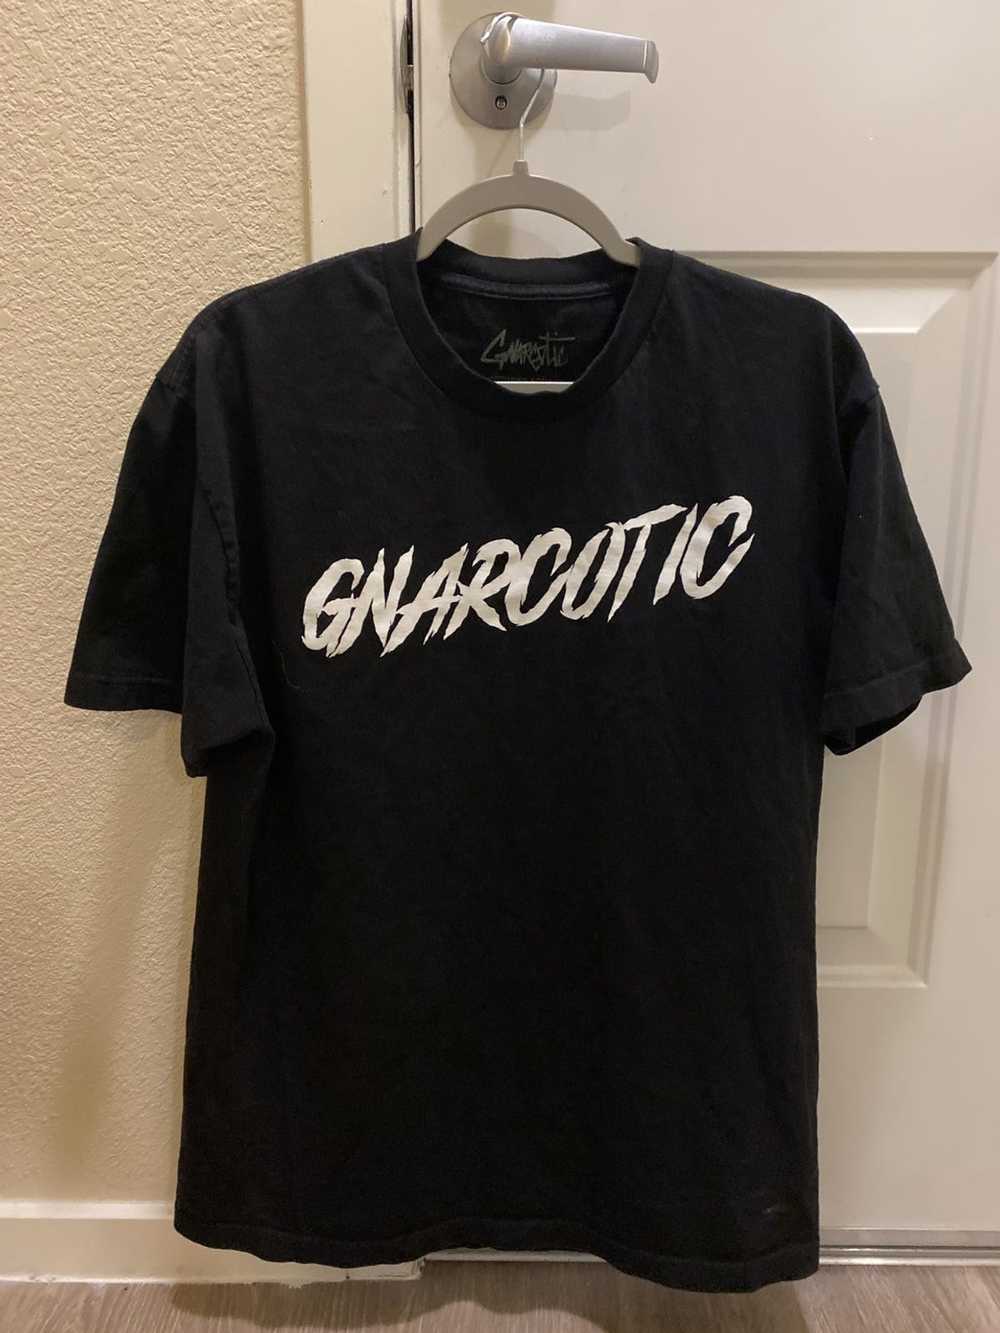 Gnarcotic Gnarcotic Limited Release Tee - image 2